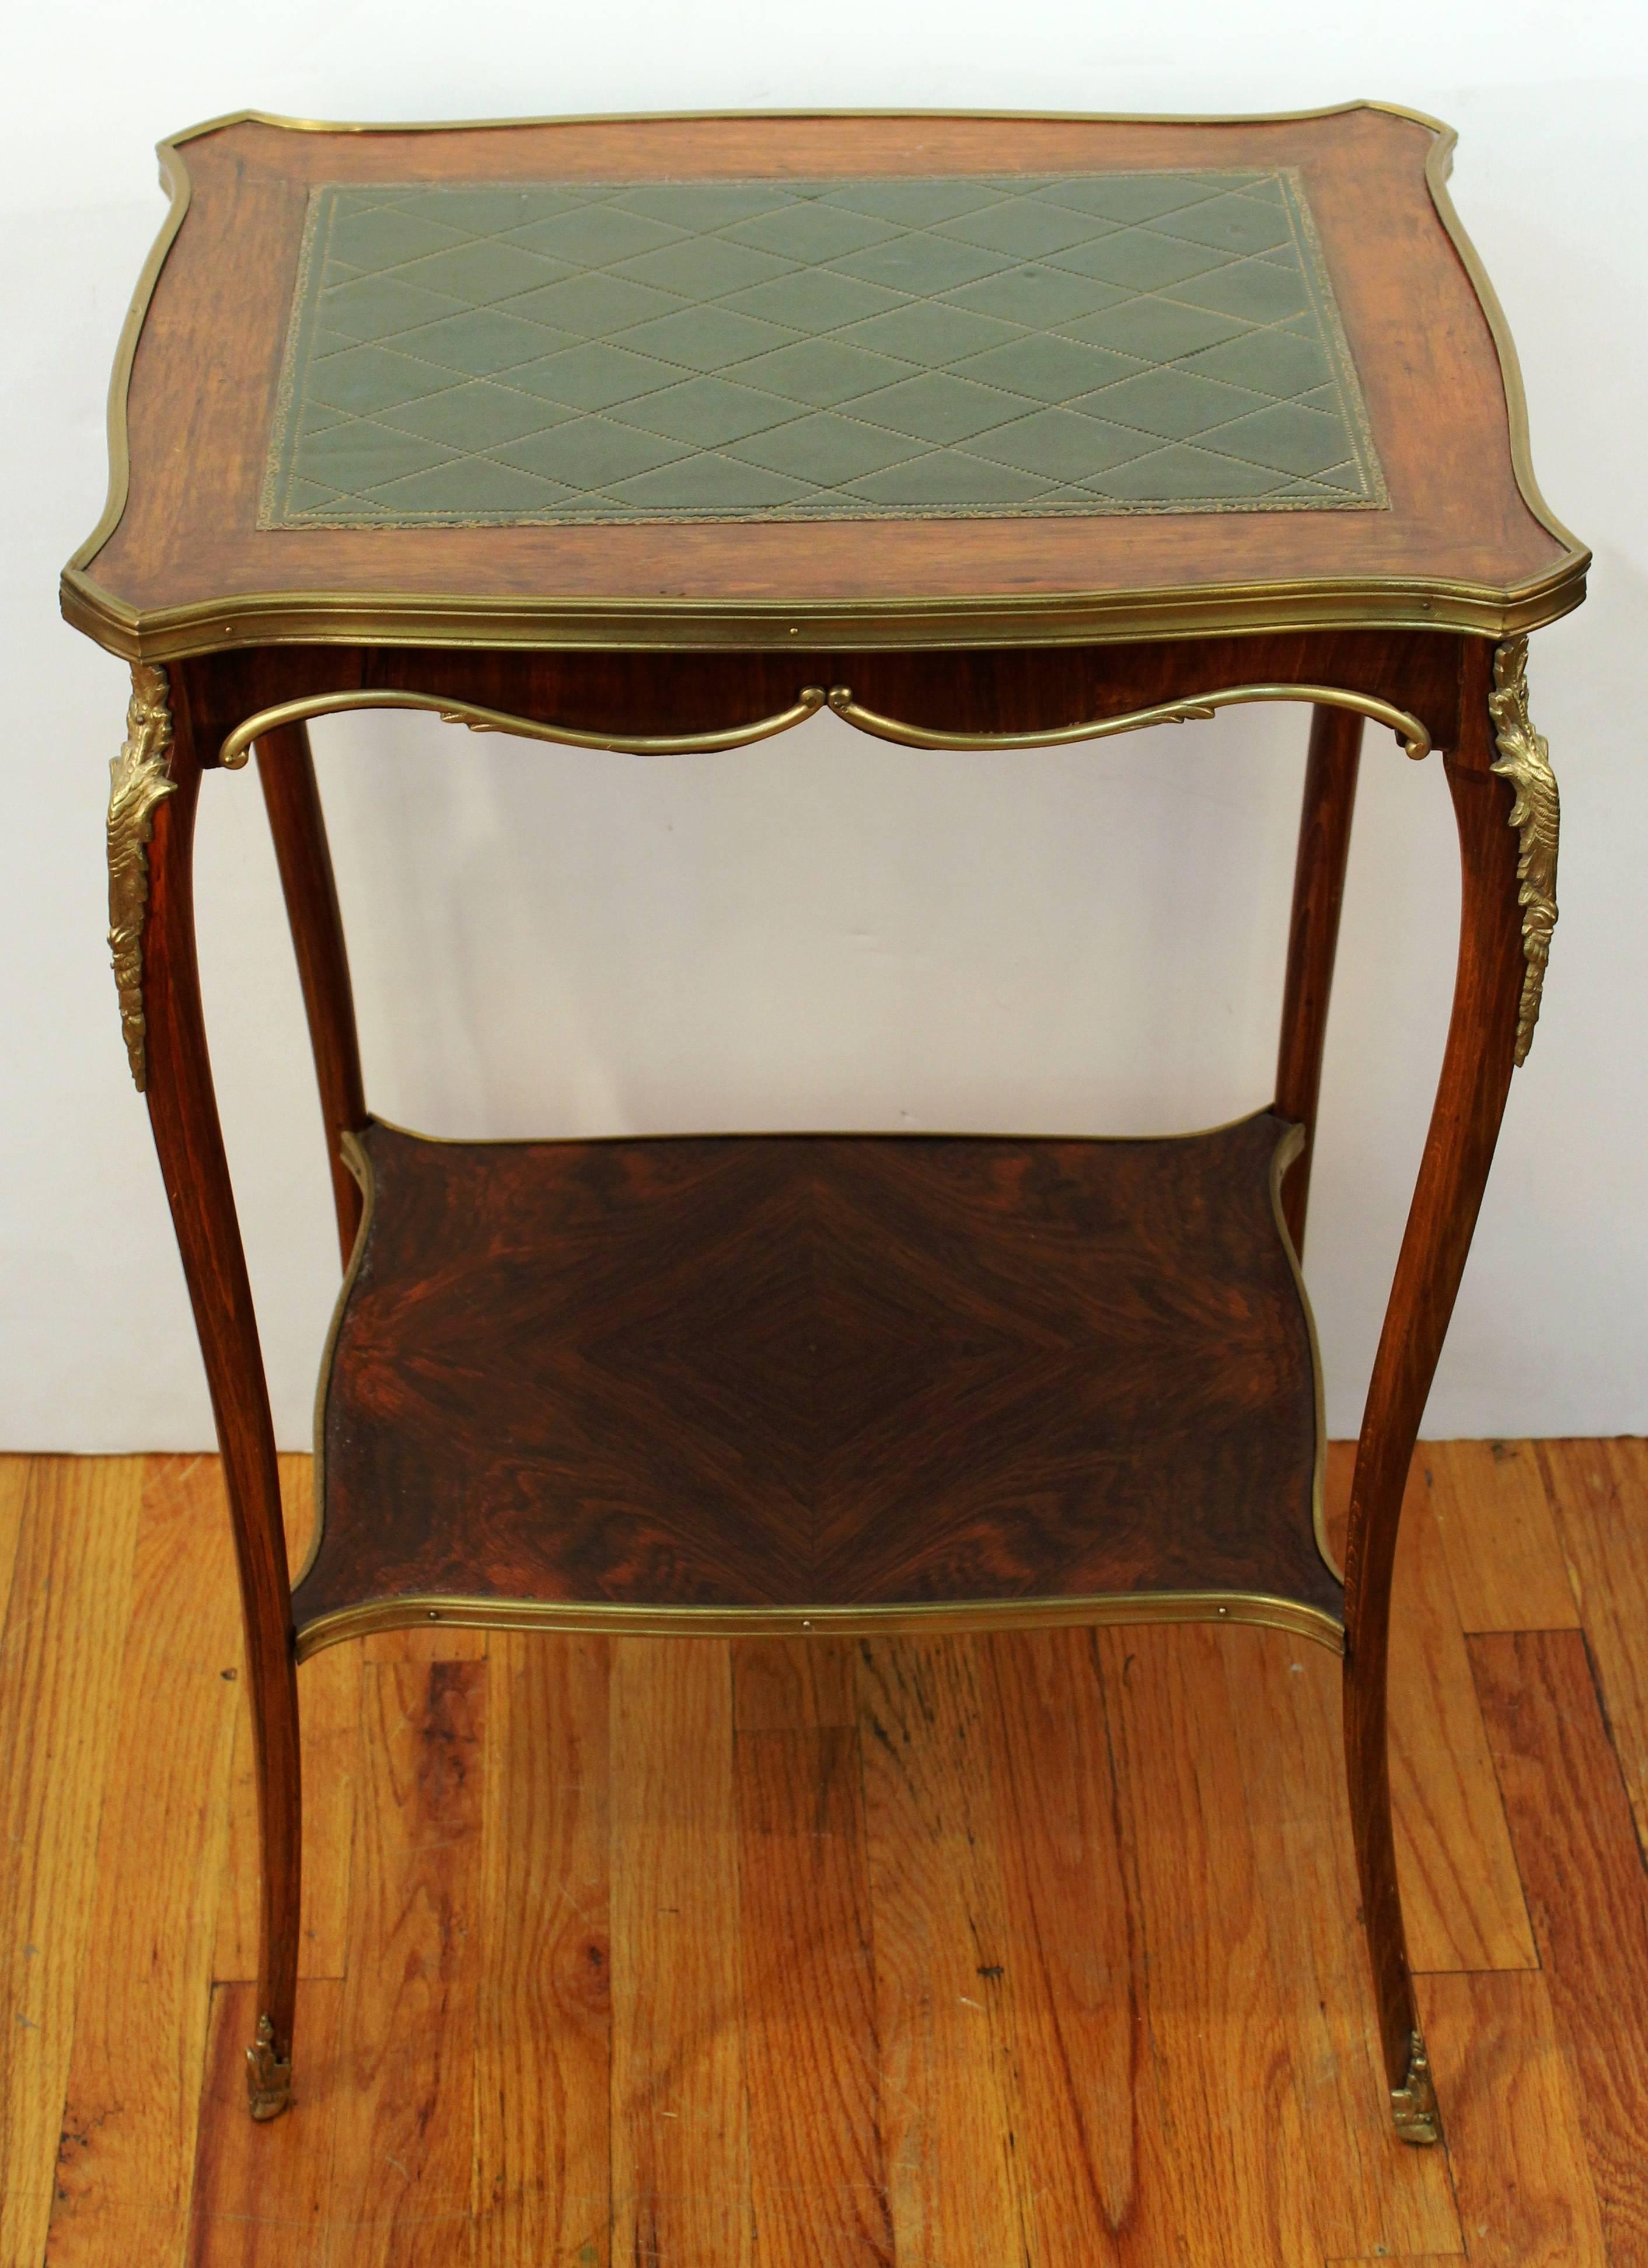 Wooden table dating from the 19th century with a lower shelf. The tabletop features green leather and the sides and corners are accented with decorative brass pieces. This table is in good vintage condition consistent with age and use. There are a